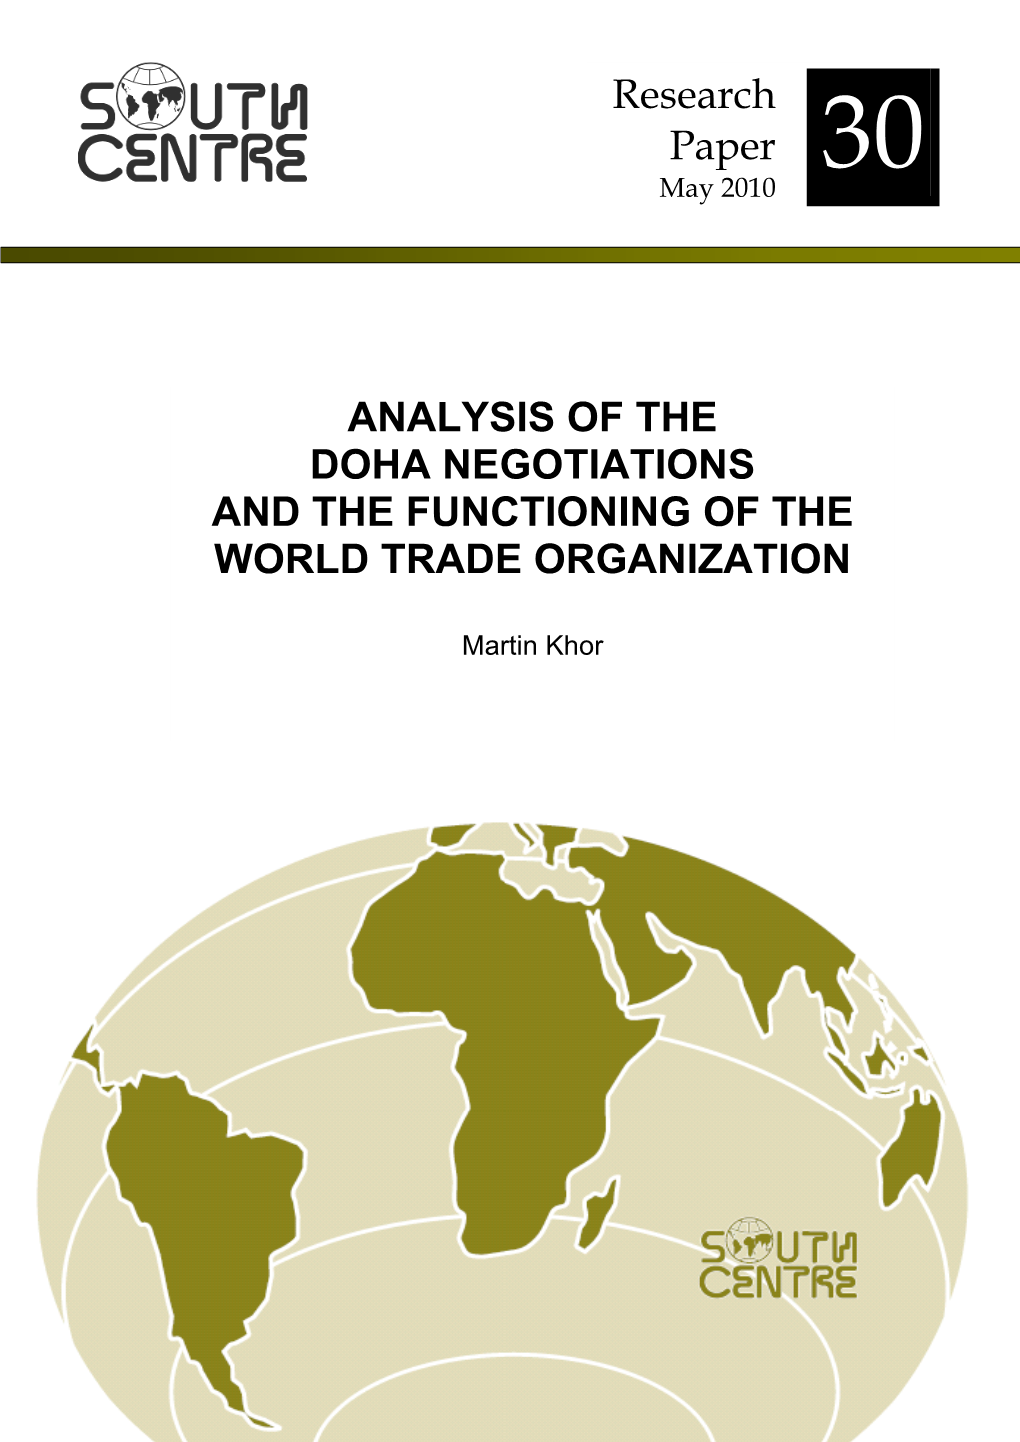 Analysis of the Doha Negotiations and the Functioning of the World Trade Organization, 2010